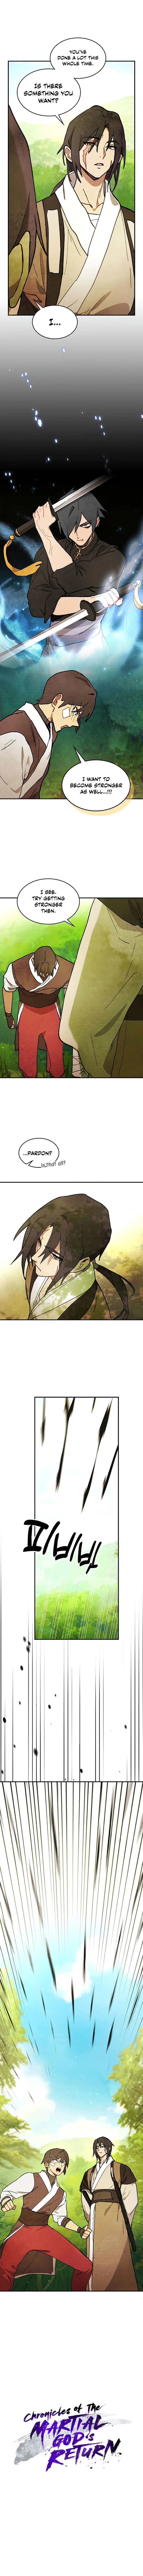 chronicles-of-the-martial-gods-return-chap-30-1